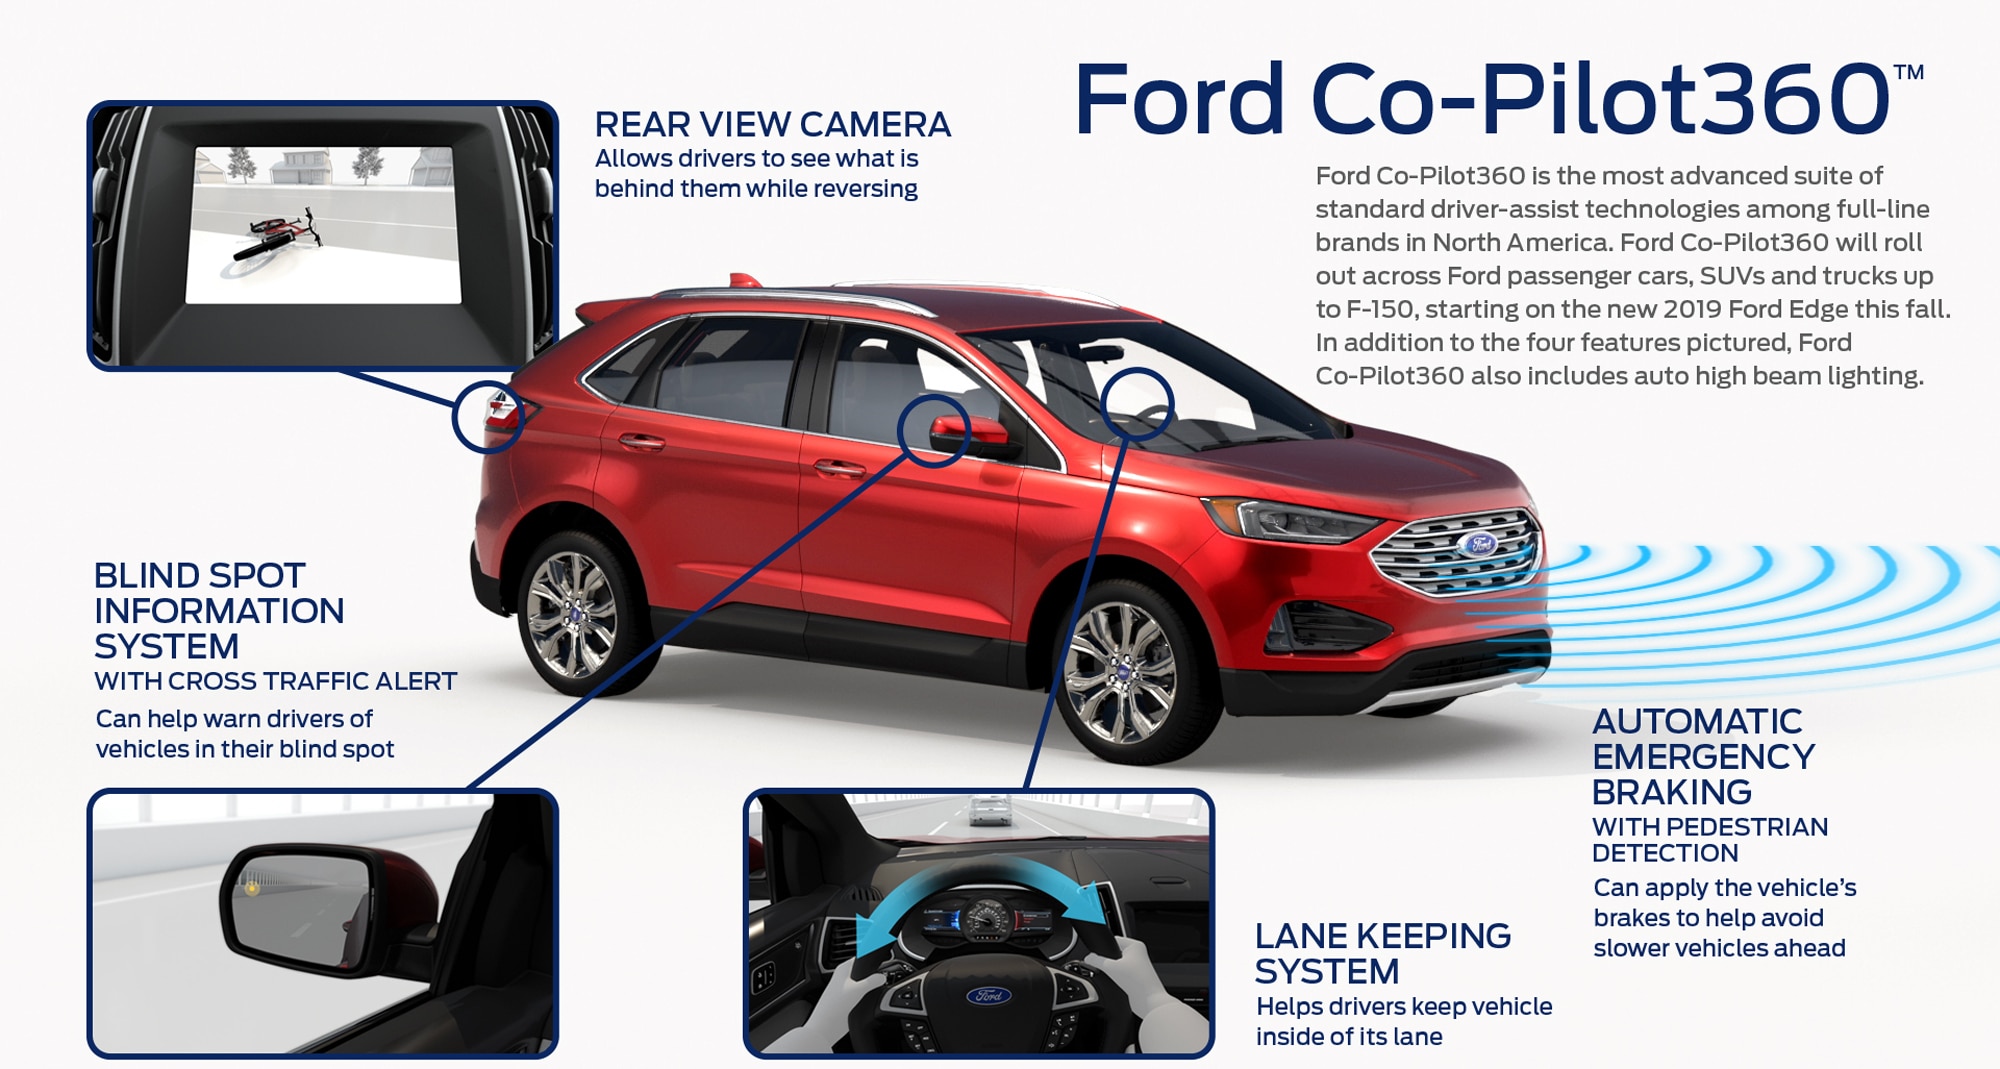 Ford Co-Pilot 360 informational